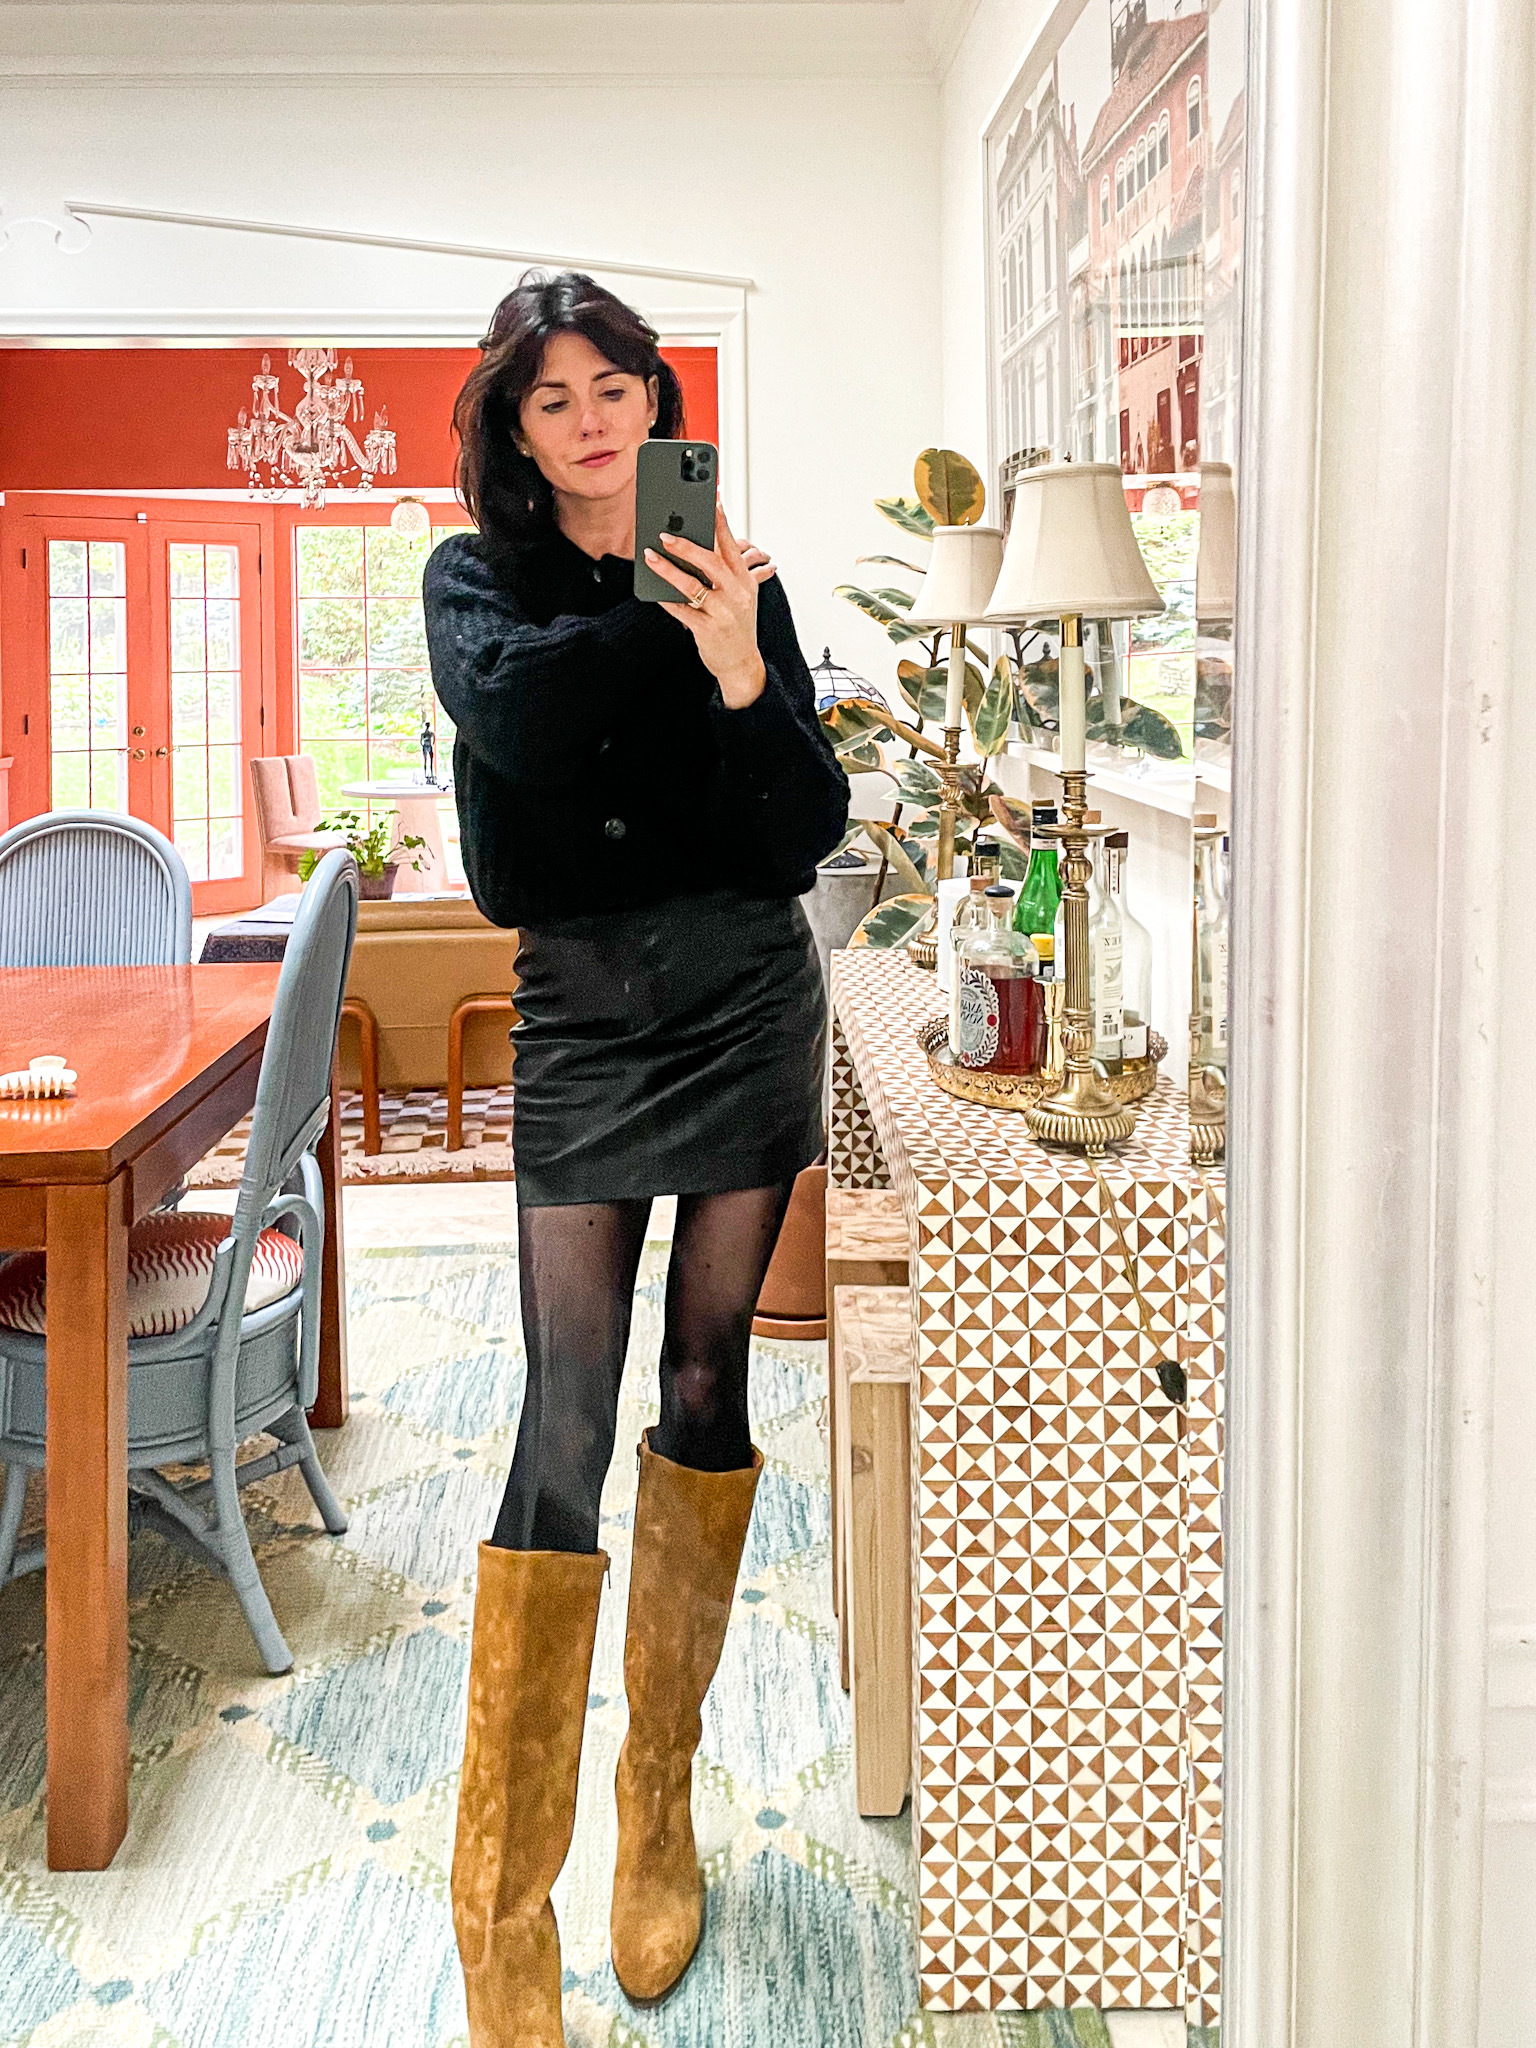 A woman is standing in front of a mirror wearing a black Sézane skirt, black cardigan sweater, black tights, and tall brown suede boots